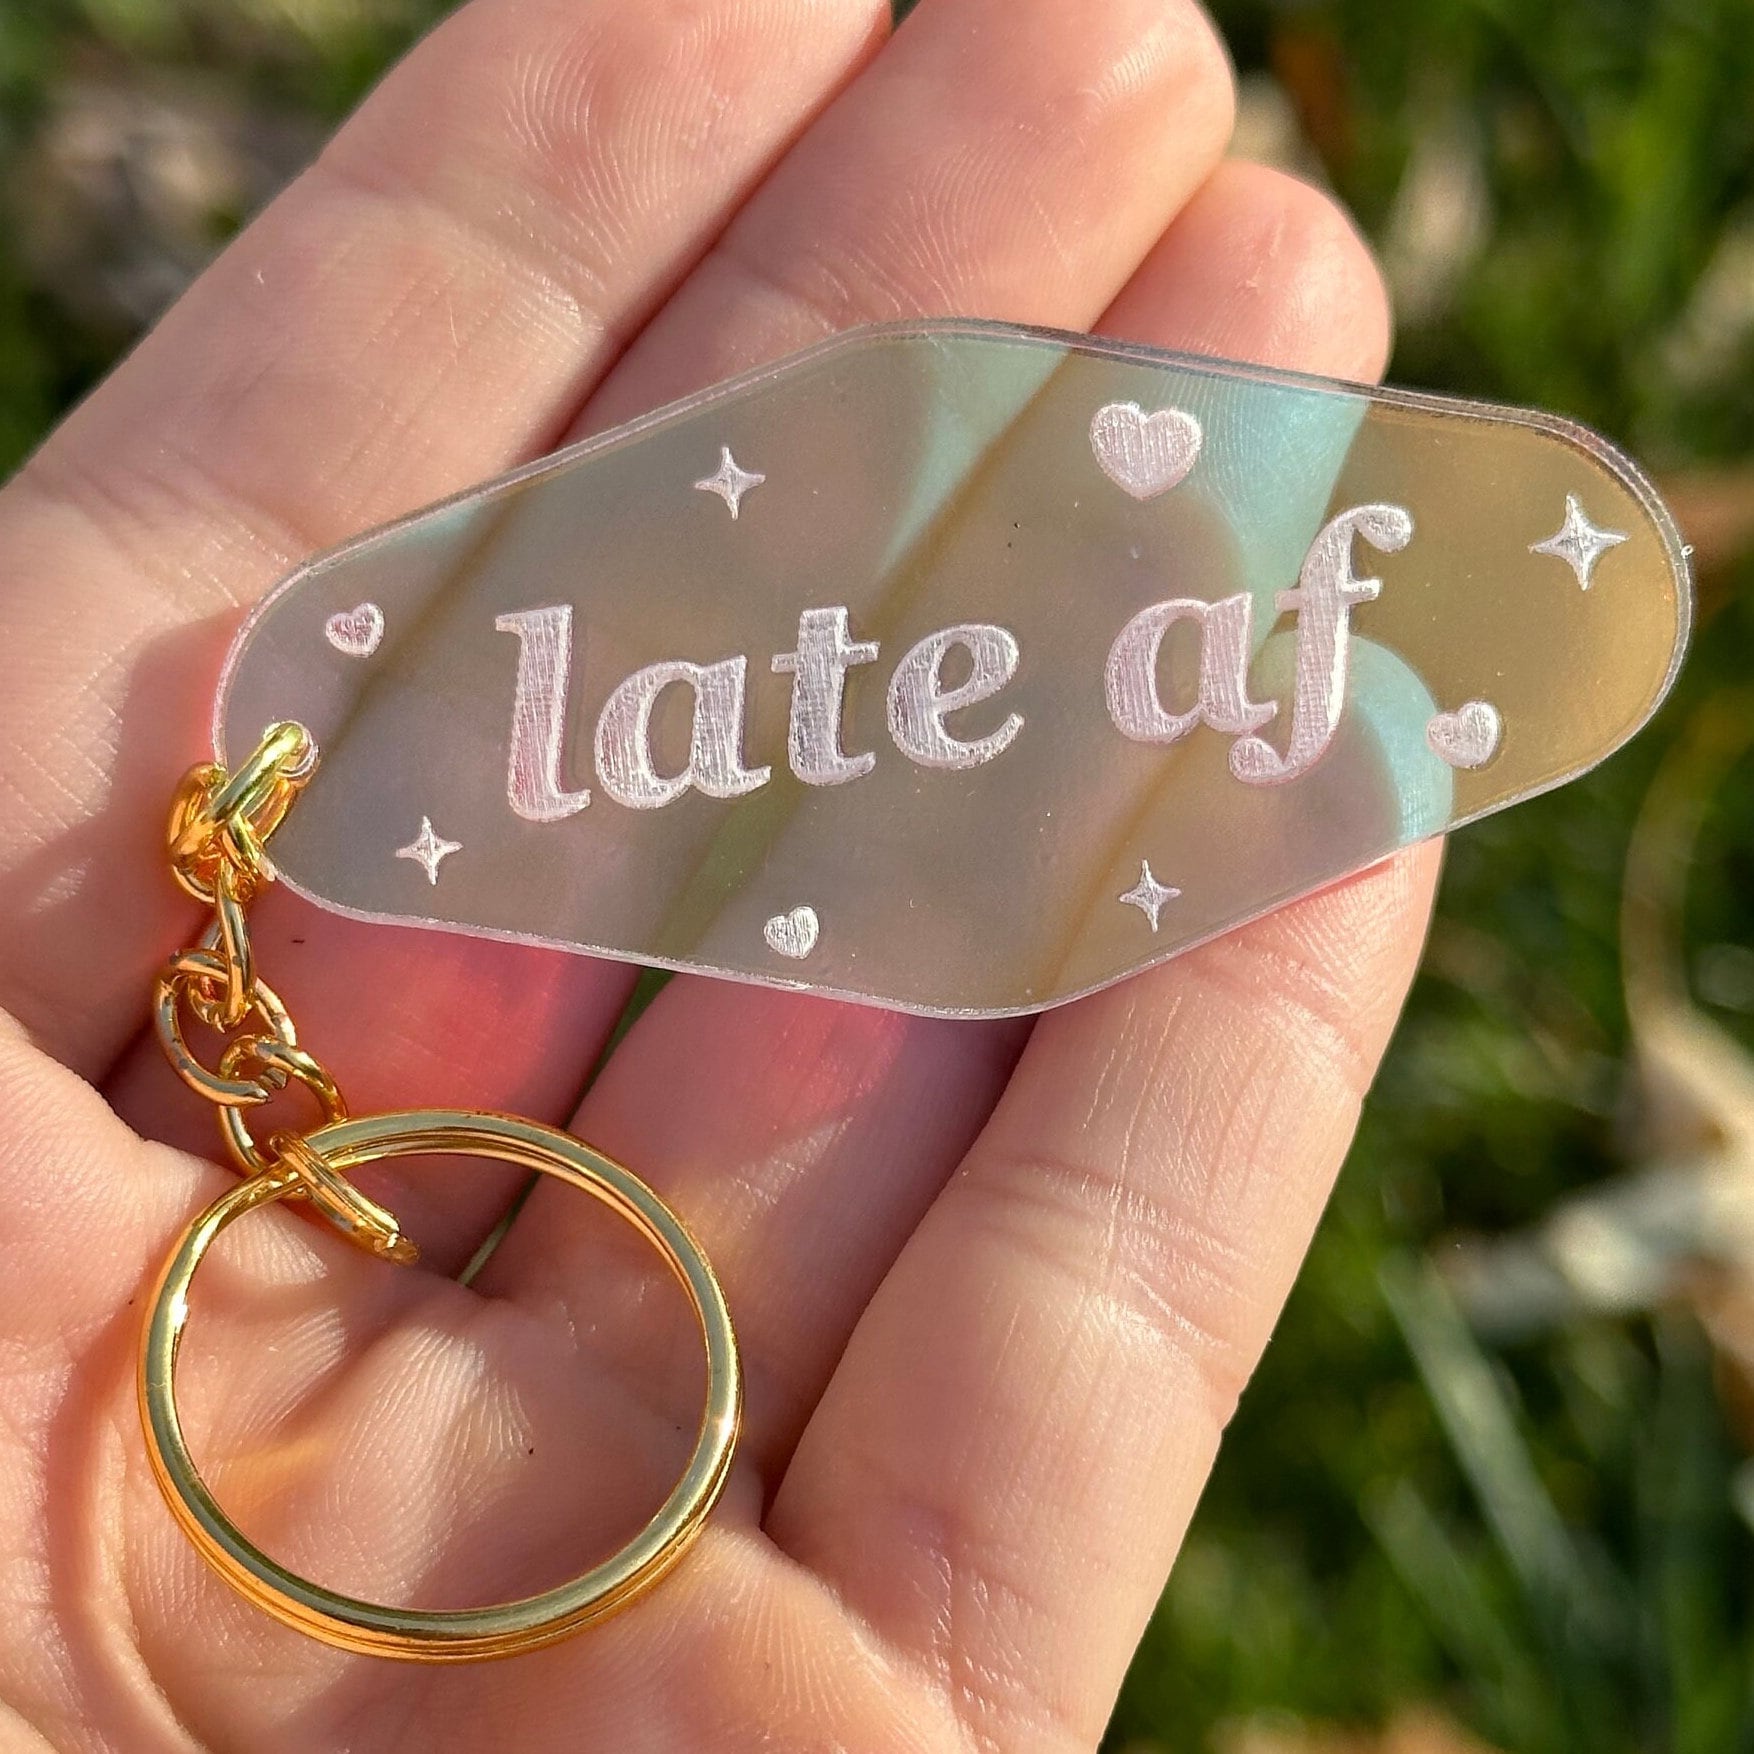 Made To Order Late AF Iridescent Acrylic Keychain